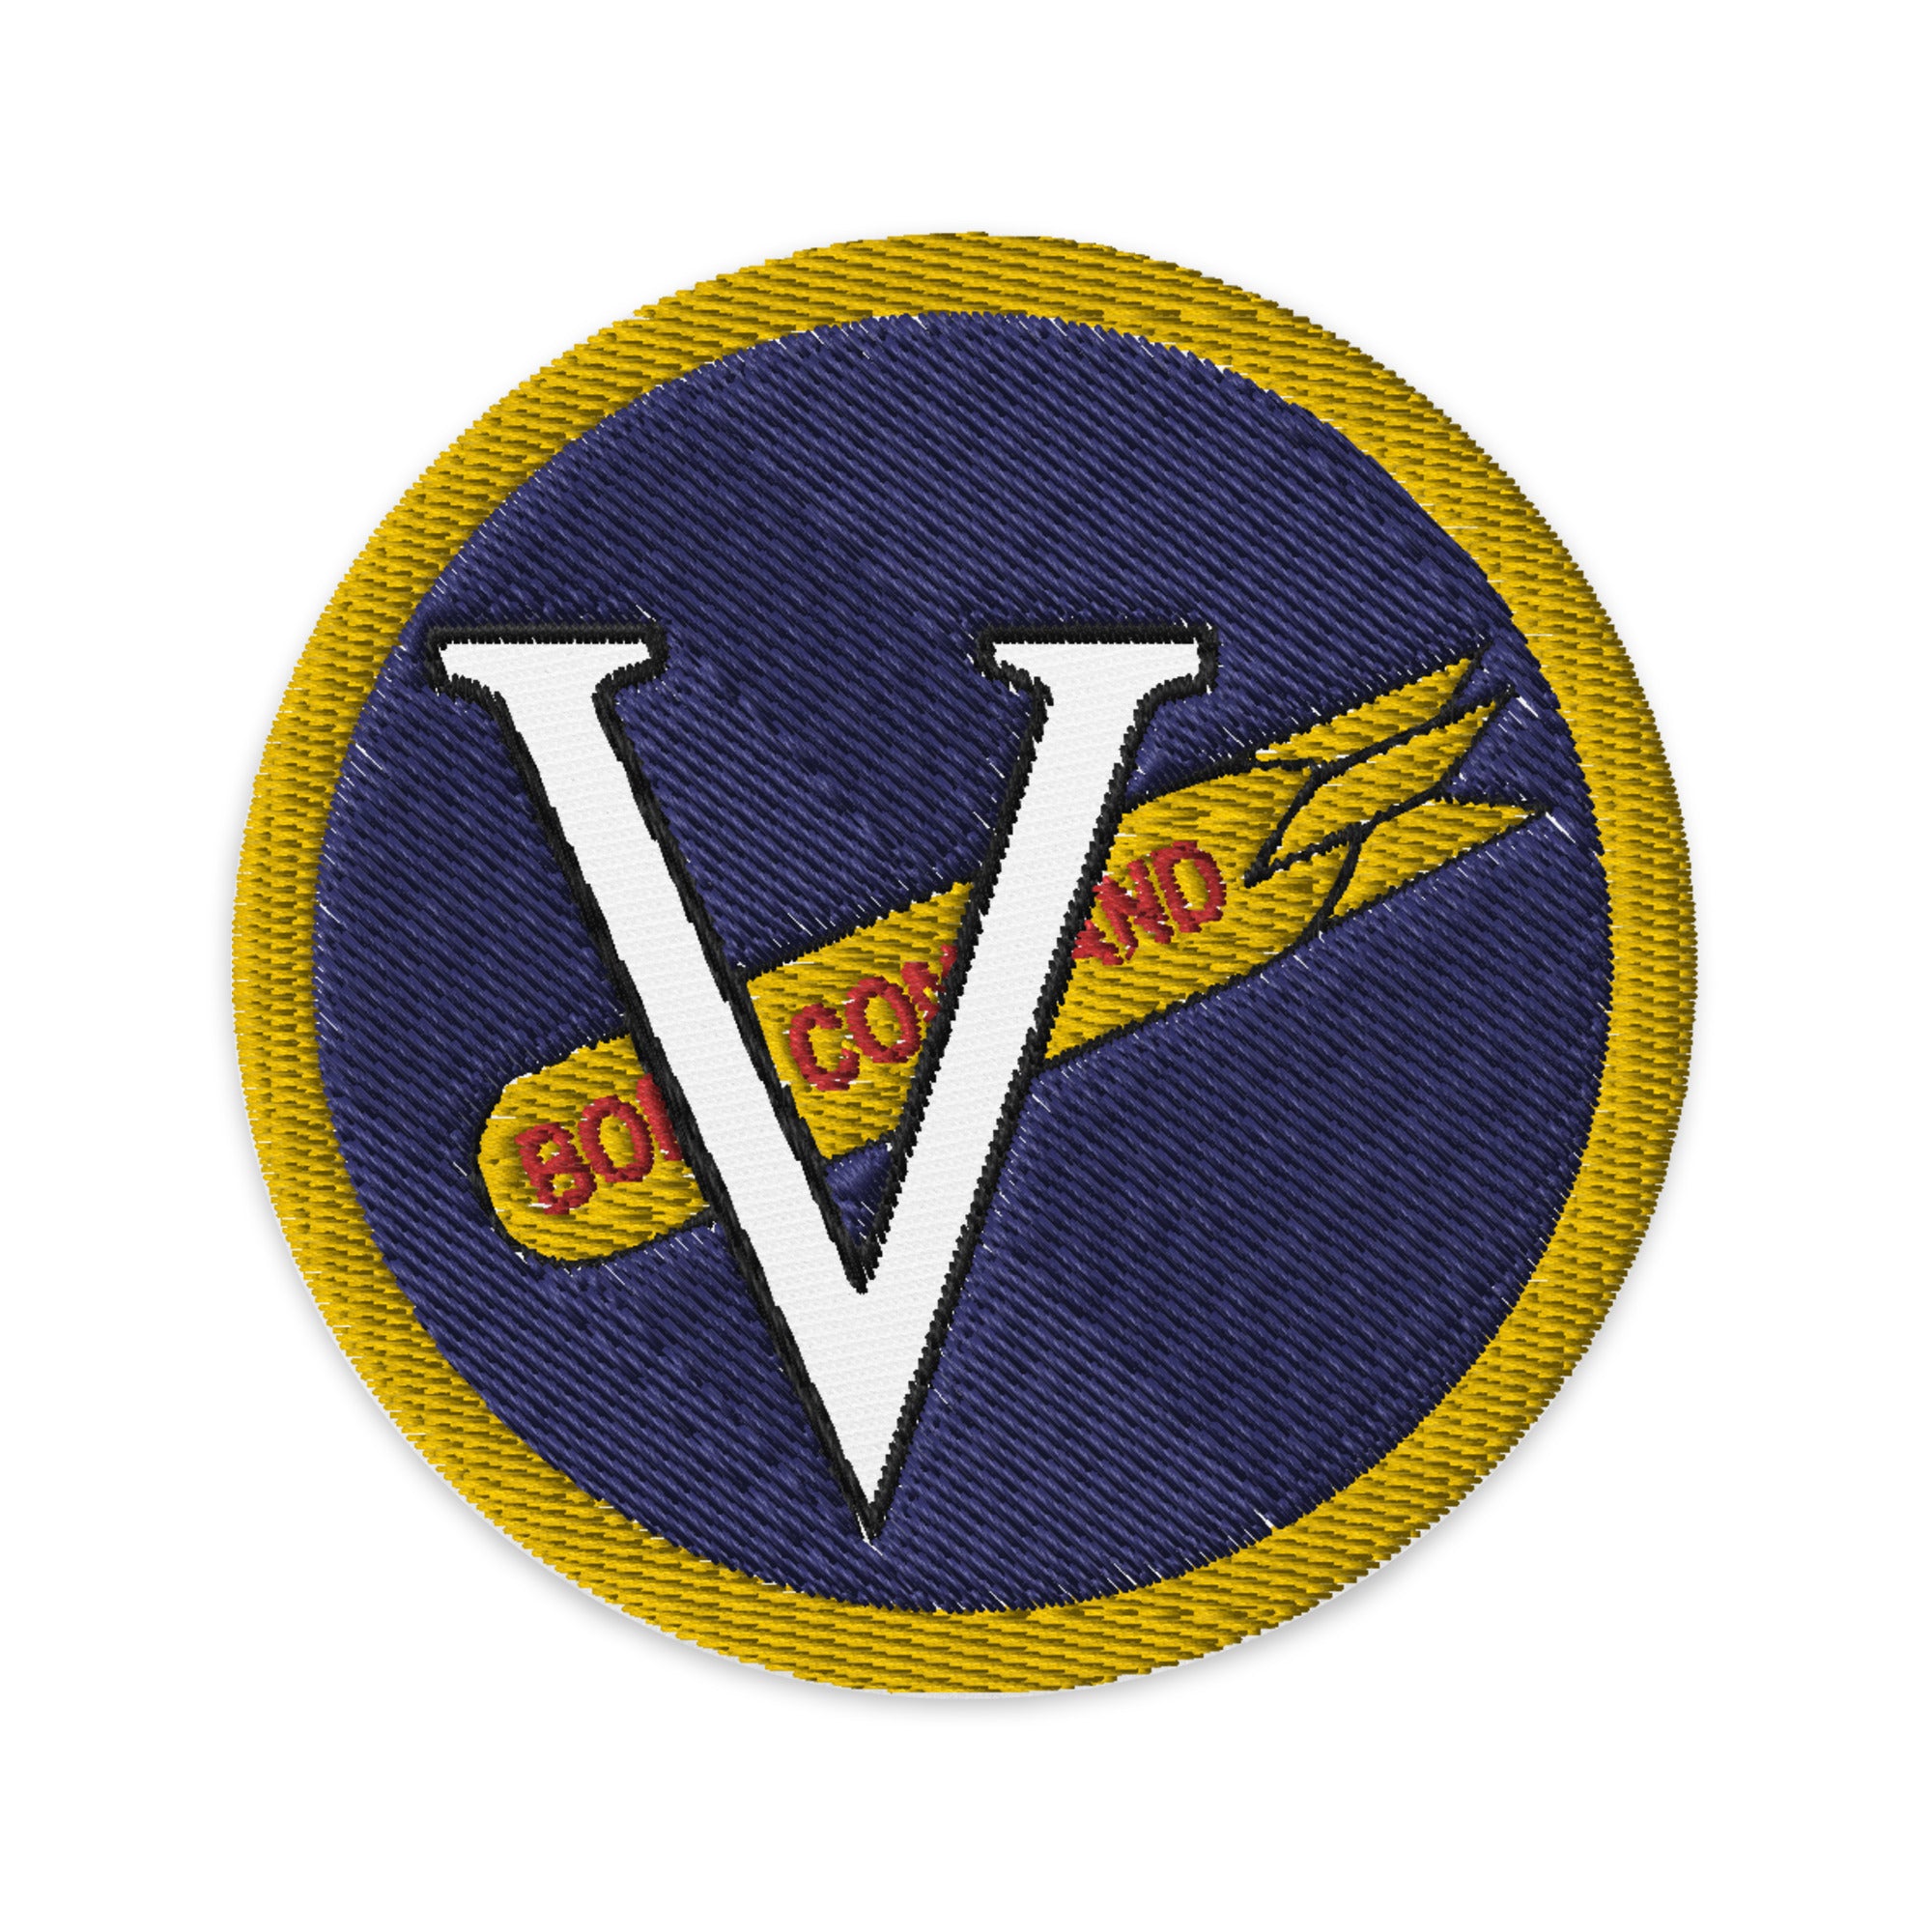 "V" Bomb Command Embroidered patches - I Love a Hangar